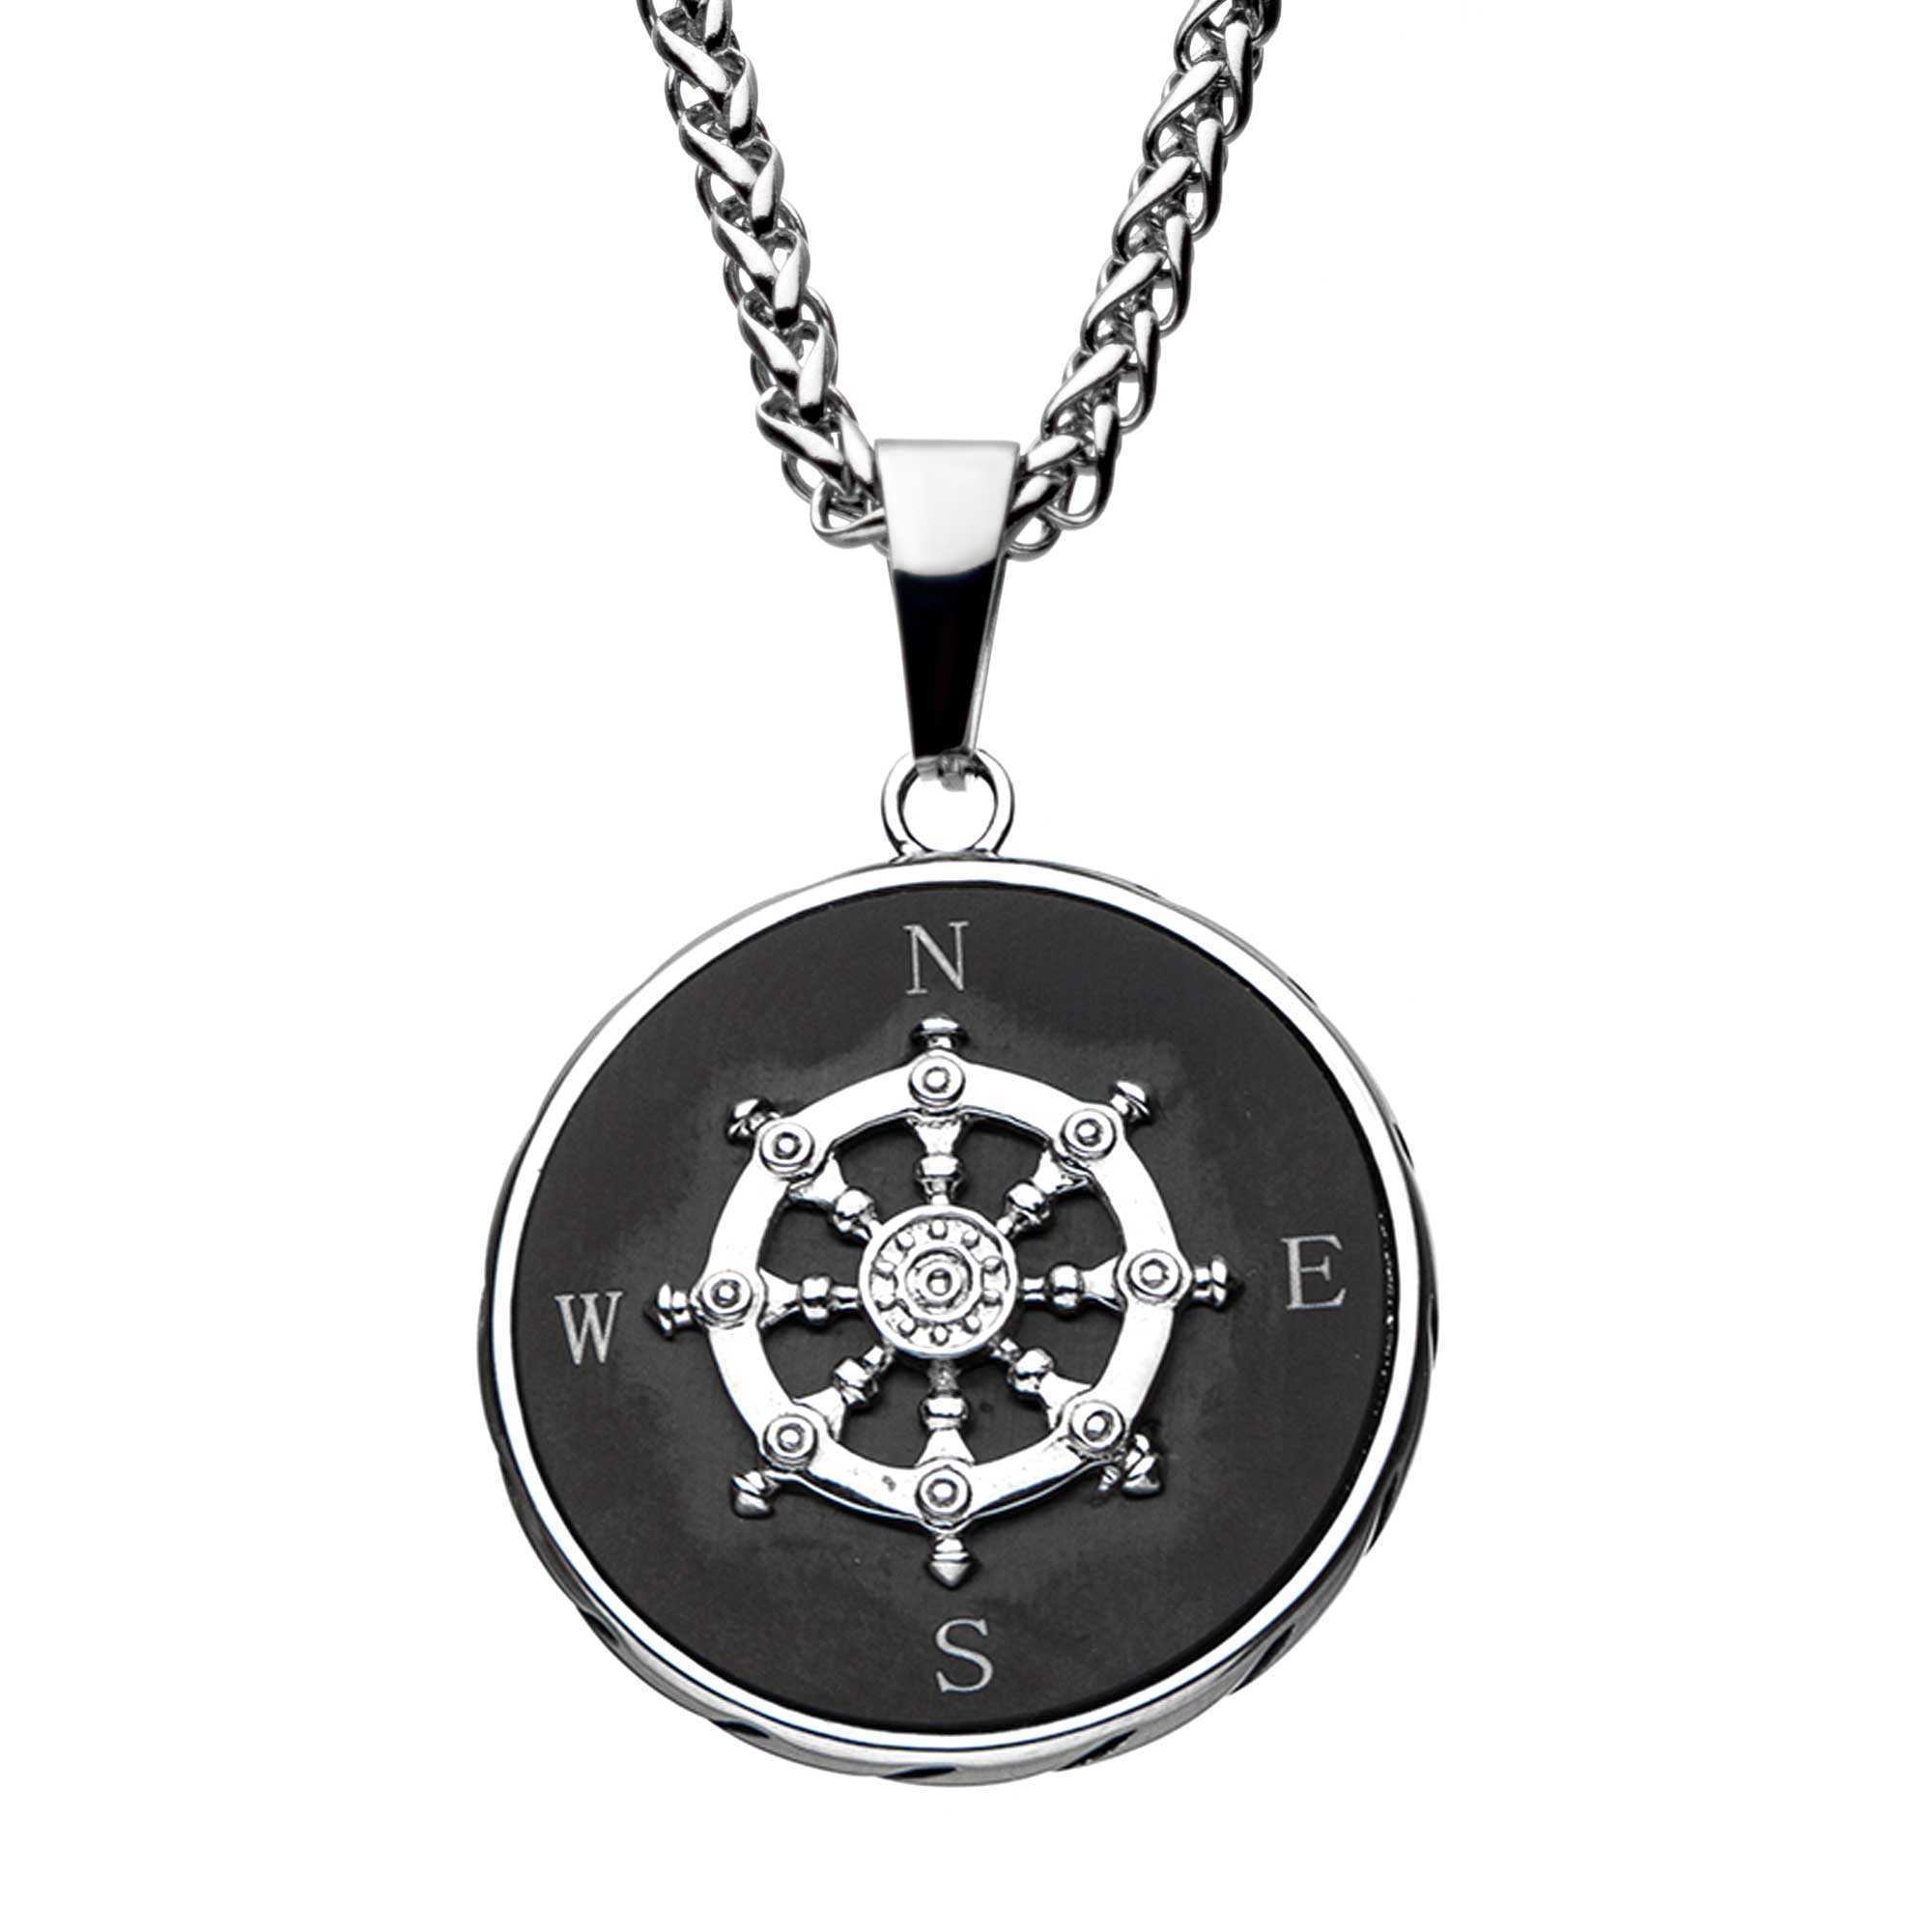 Stainless Steel Black Plated Ship's Wheel Compass Pendant with Chain Enchanted Jewelry Plainfield, CT